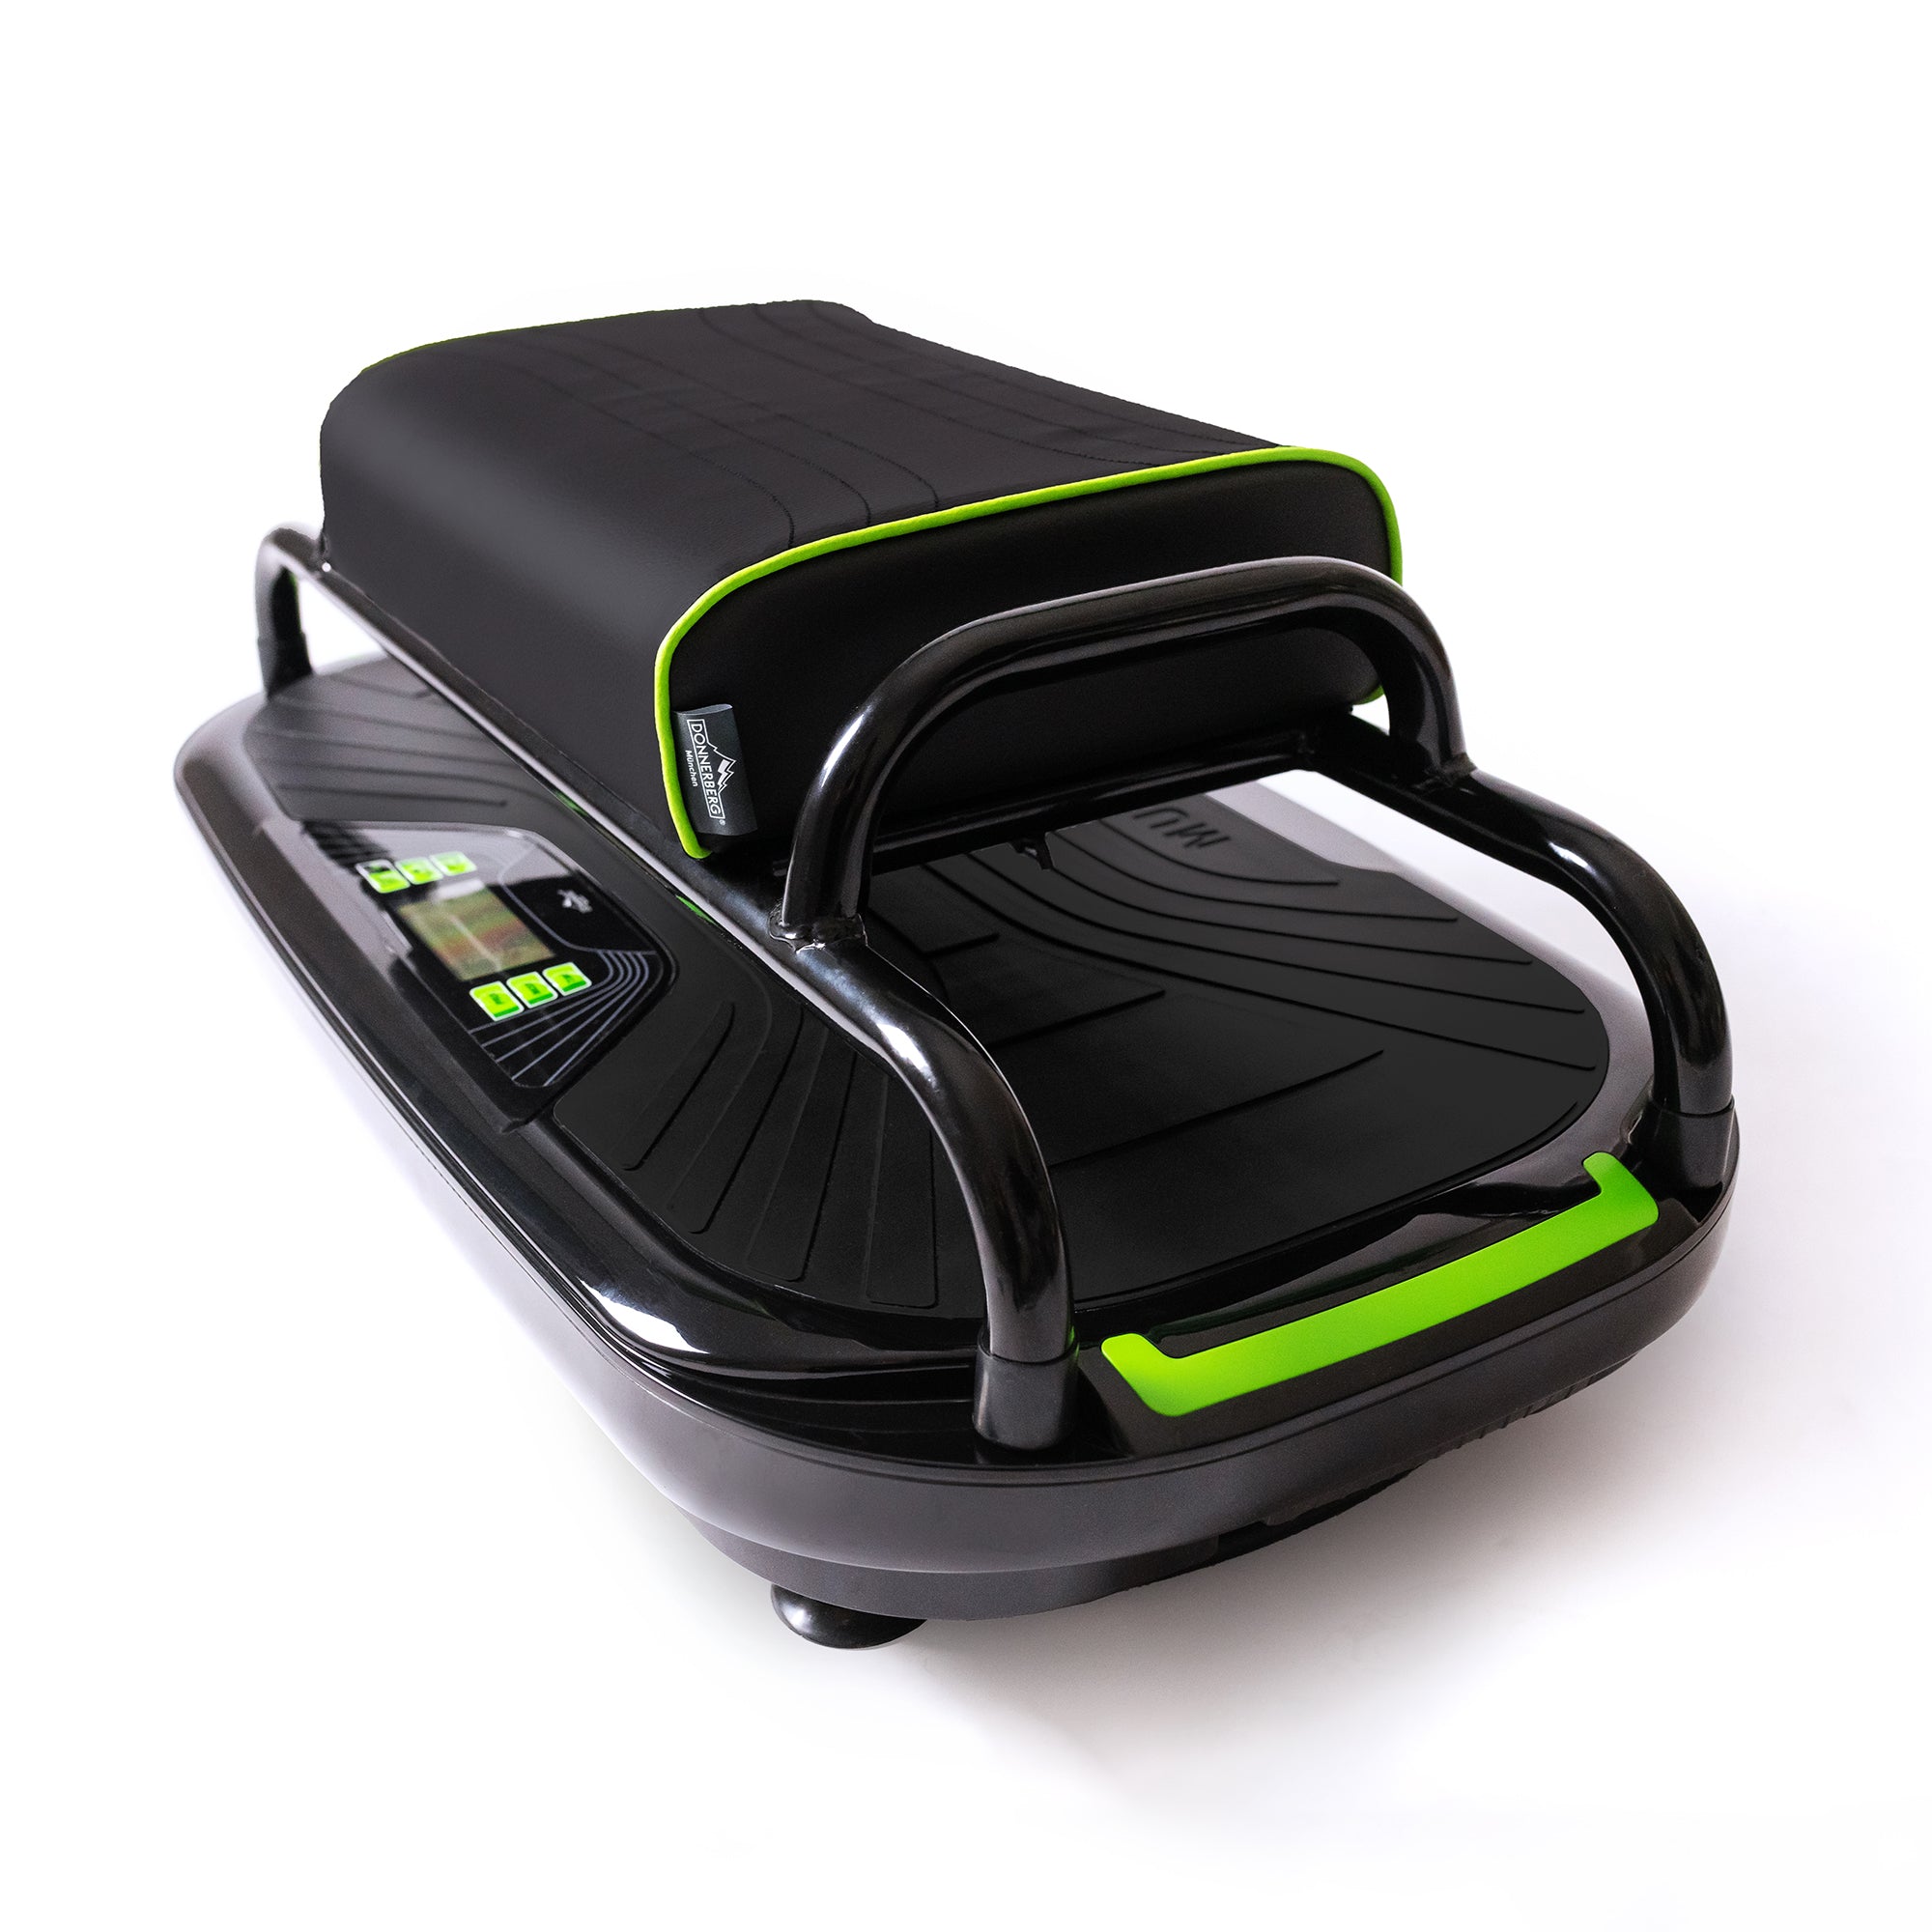 Vibration platform in black with exercise seat